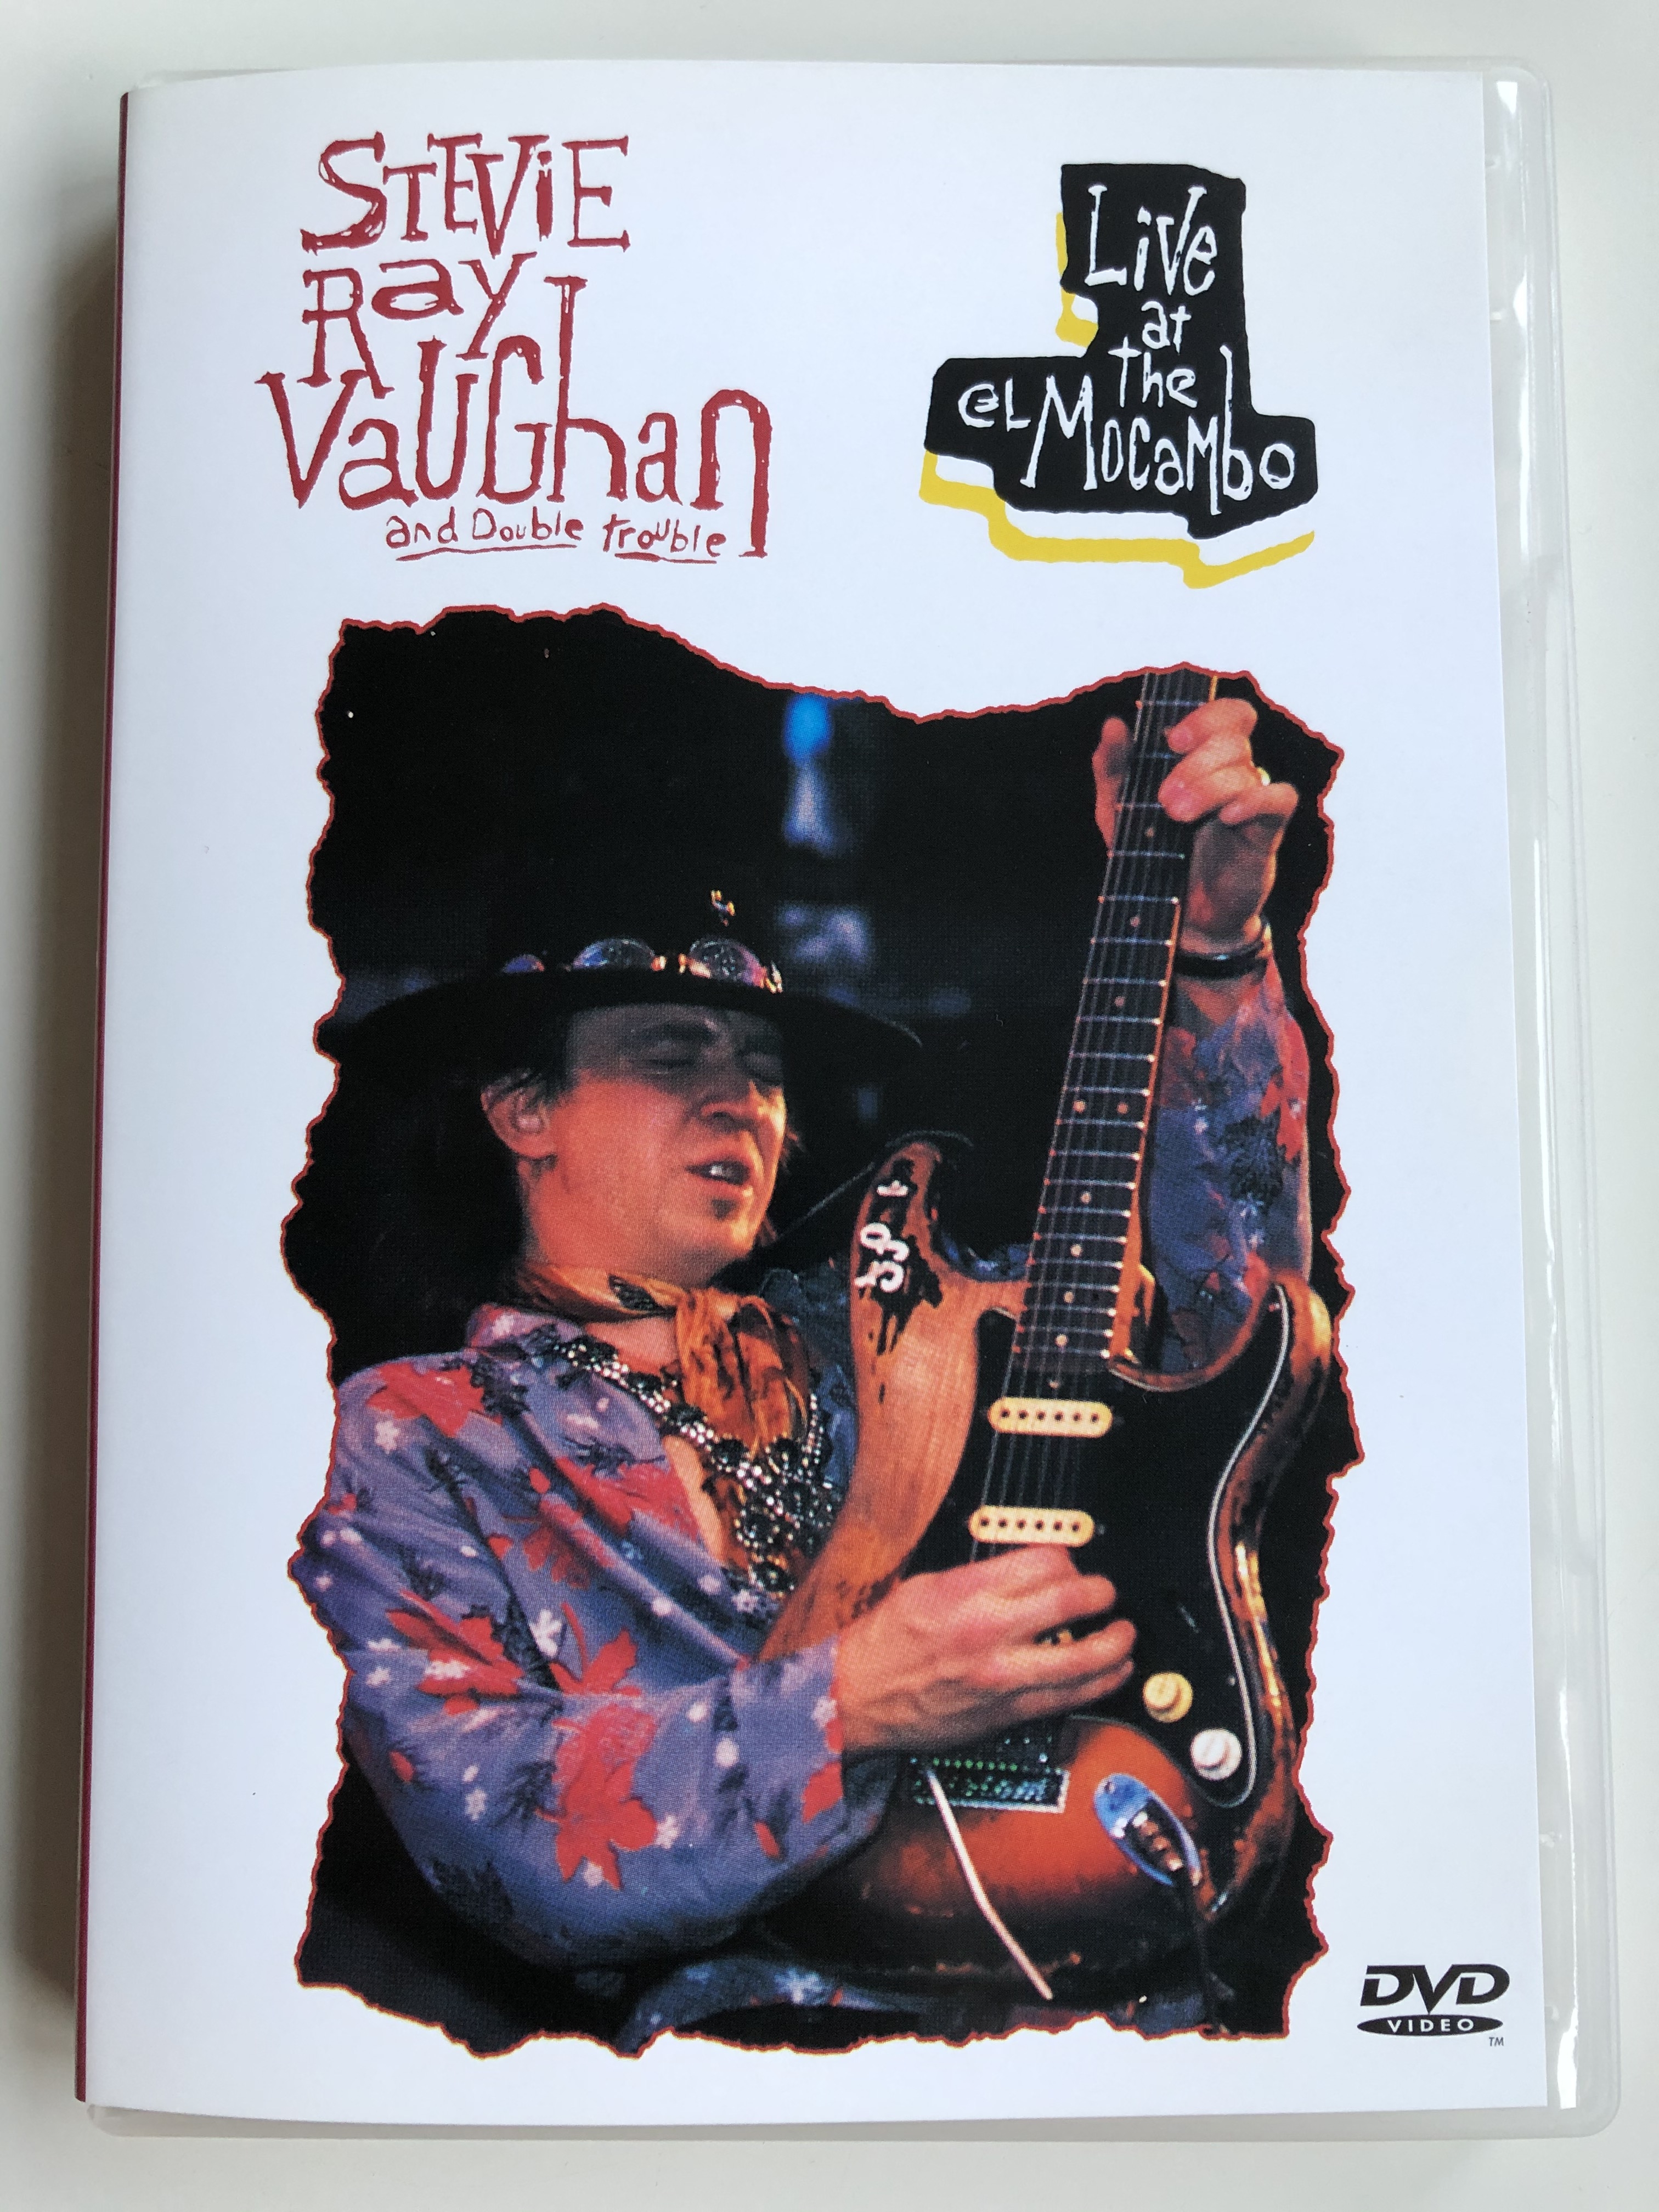 stevie-ray-vaughan-and-double-trouble-dvd-1991-1.jpg